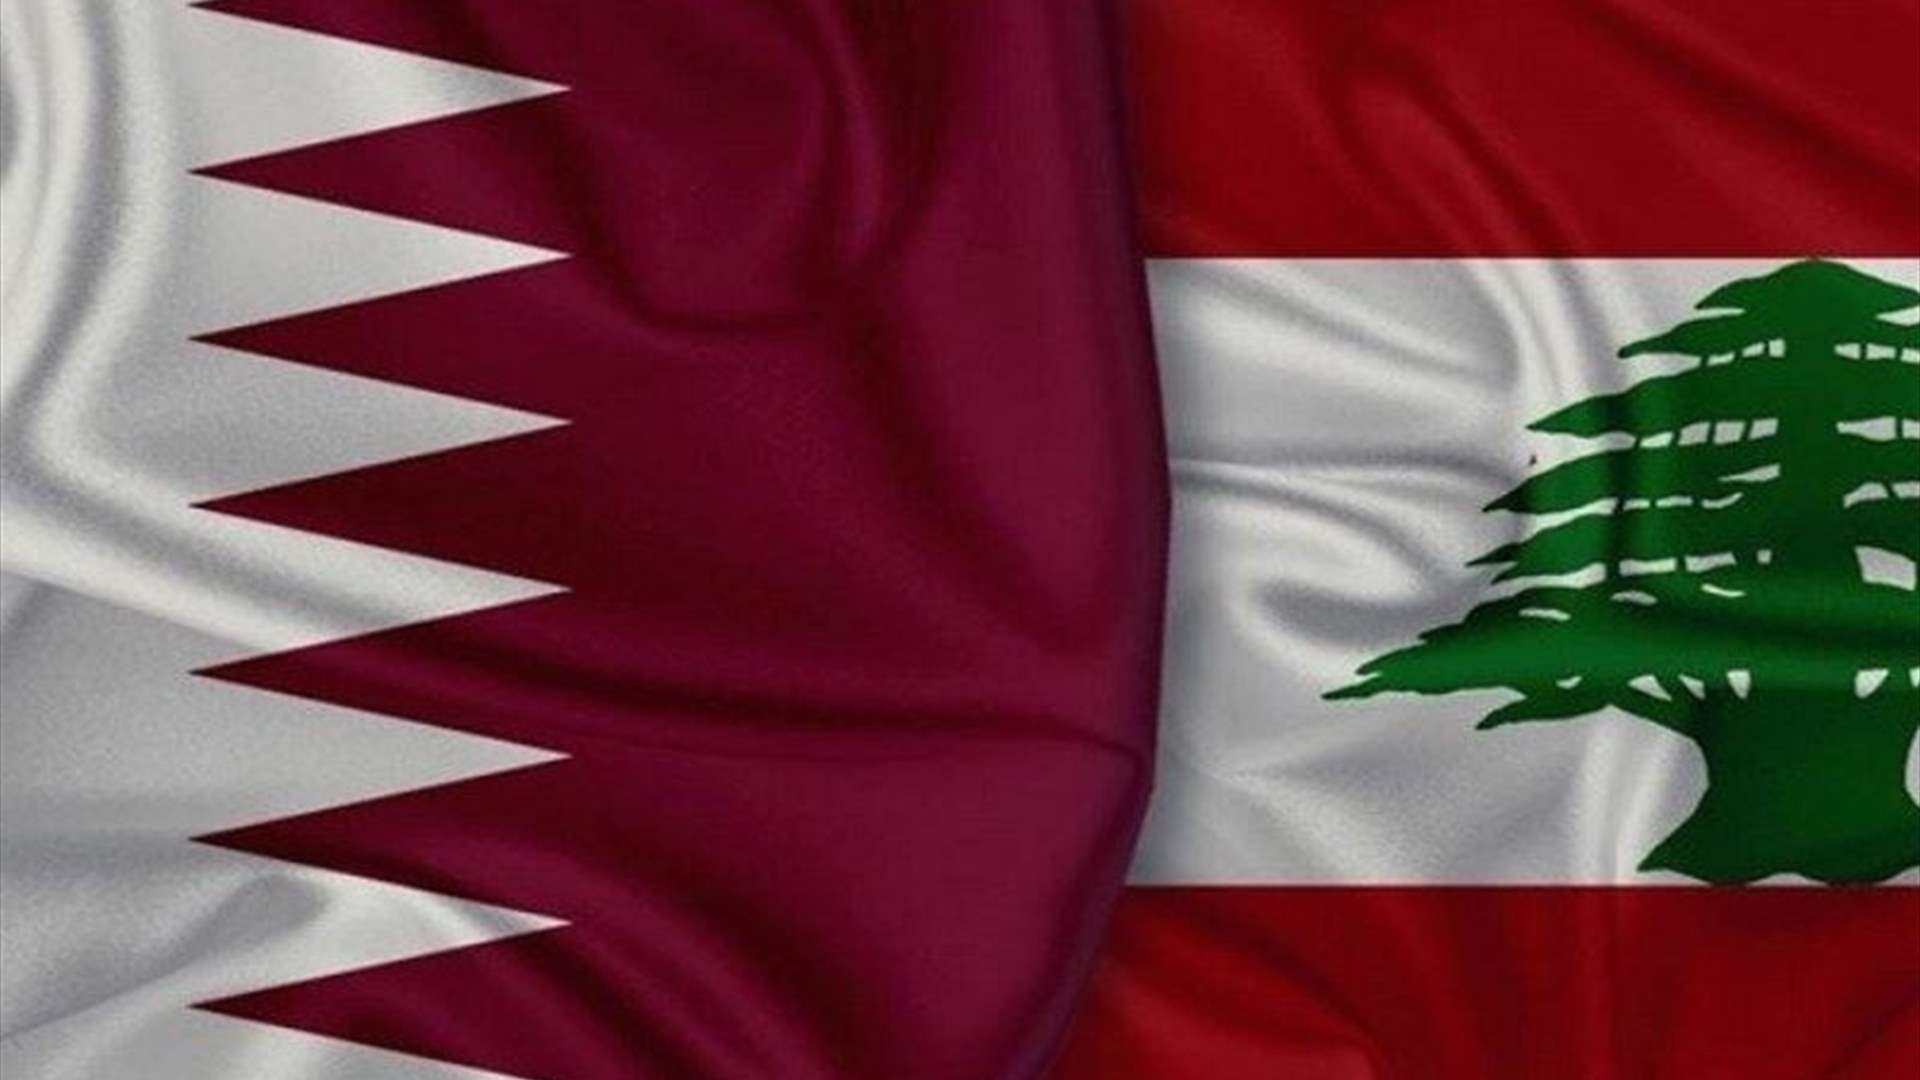 Qatar&#39;s efforts: Lebanon&#39;s field movements reflect political stalemate and Syrian refugee crisis